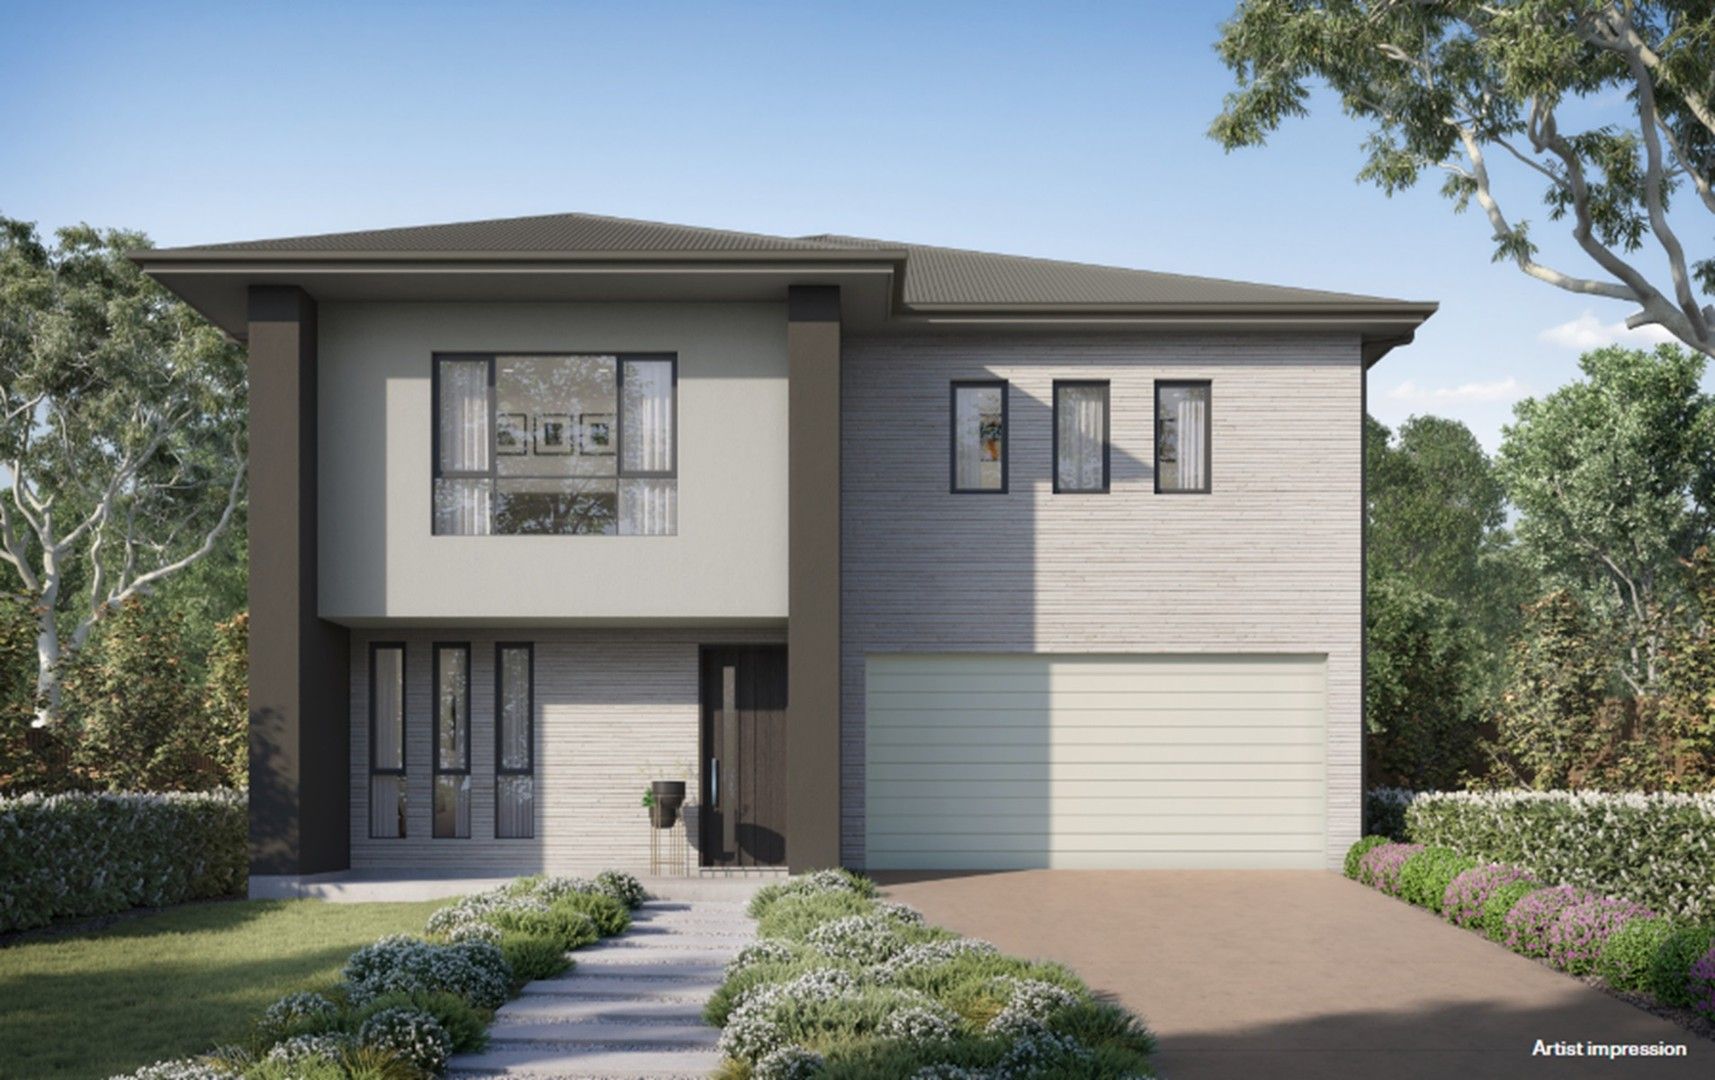 4 bedrooms New House & Land in Secure with 5%! Call to Book Inspection MARSDEN PARK NSW, 2765